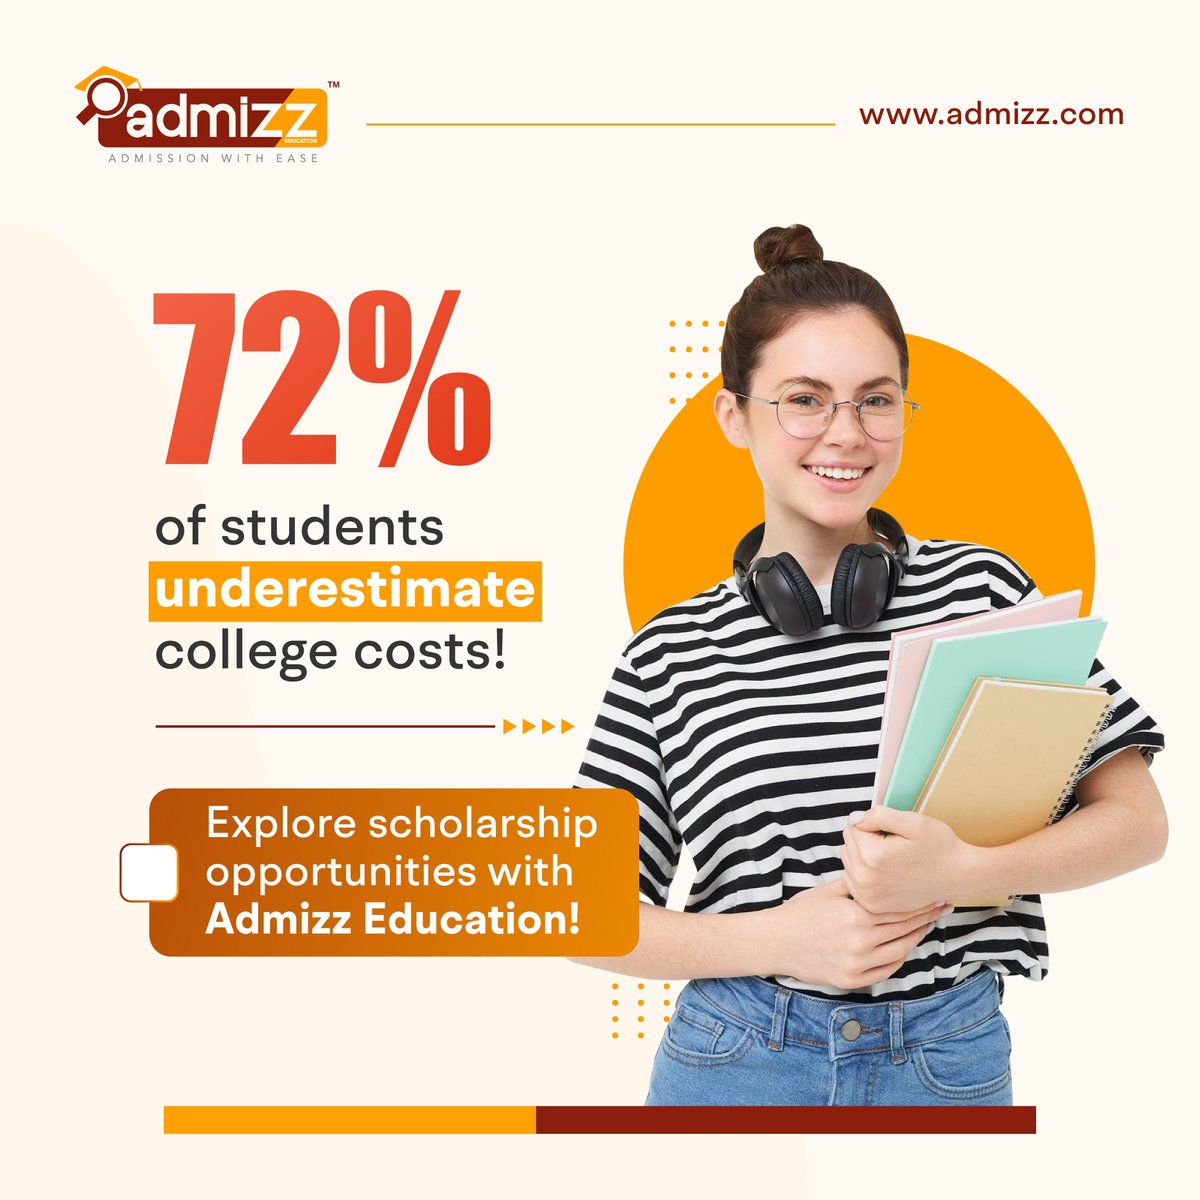 Heading into college?
Don't underestimate the costs! 72% of students do. Admizz Education: can help you find scholarships to ease the burden.
Book a Counseling: admissions-admizz.com
#CollegePlanning #Scholarships #FinancialAid  #AdmizzEducation #StudyAbroad